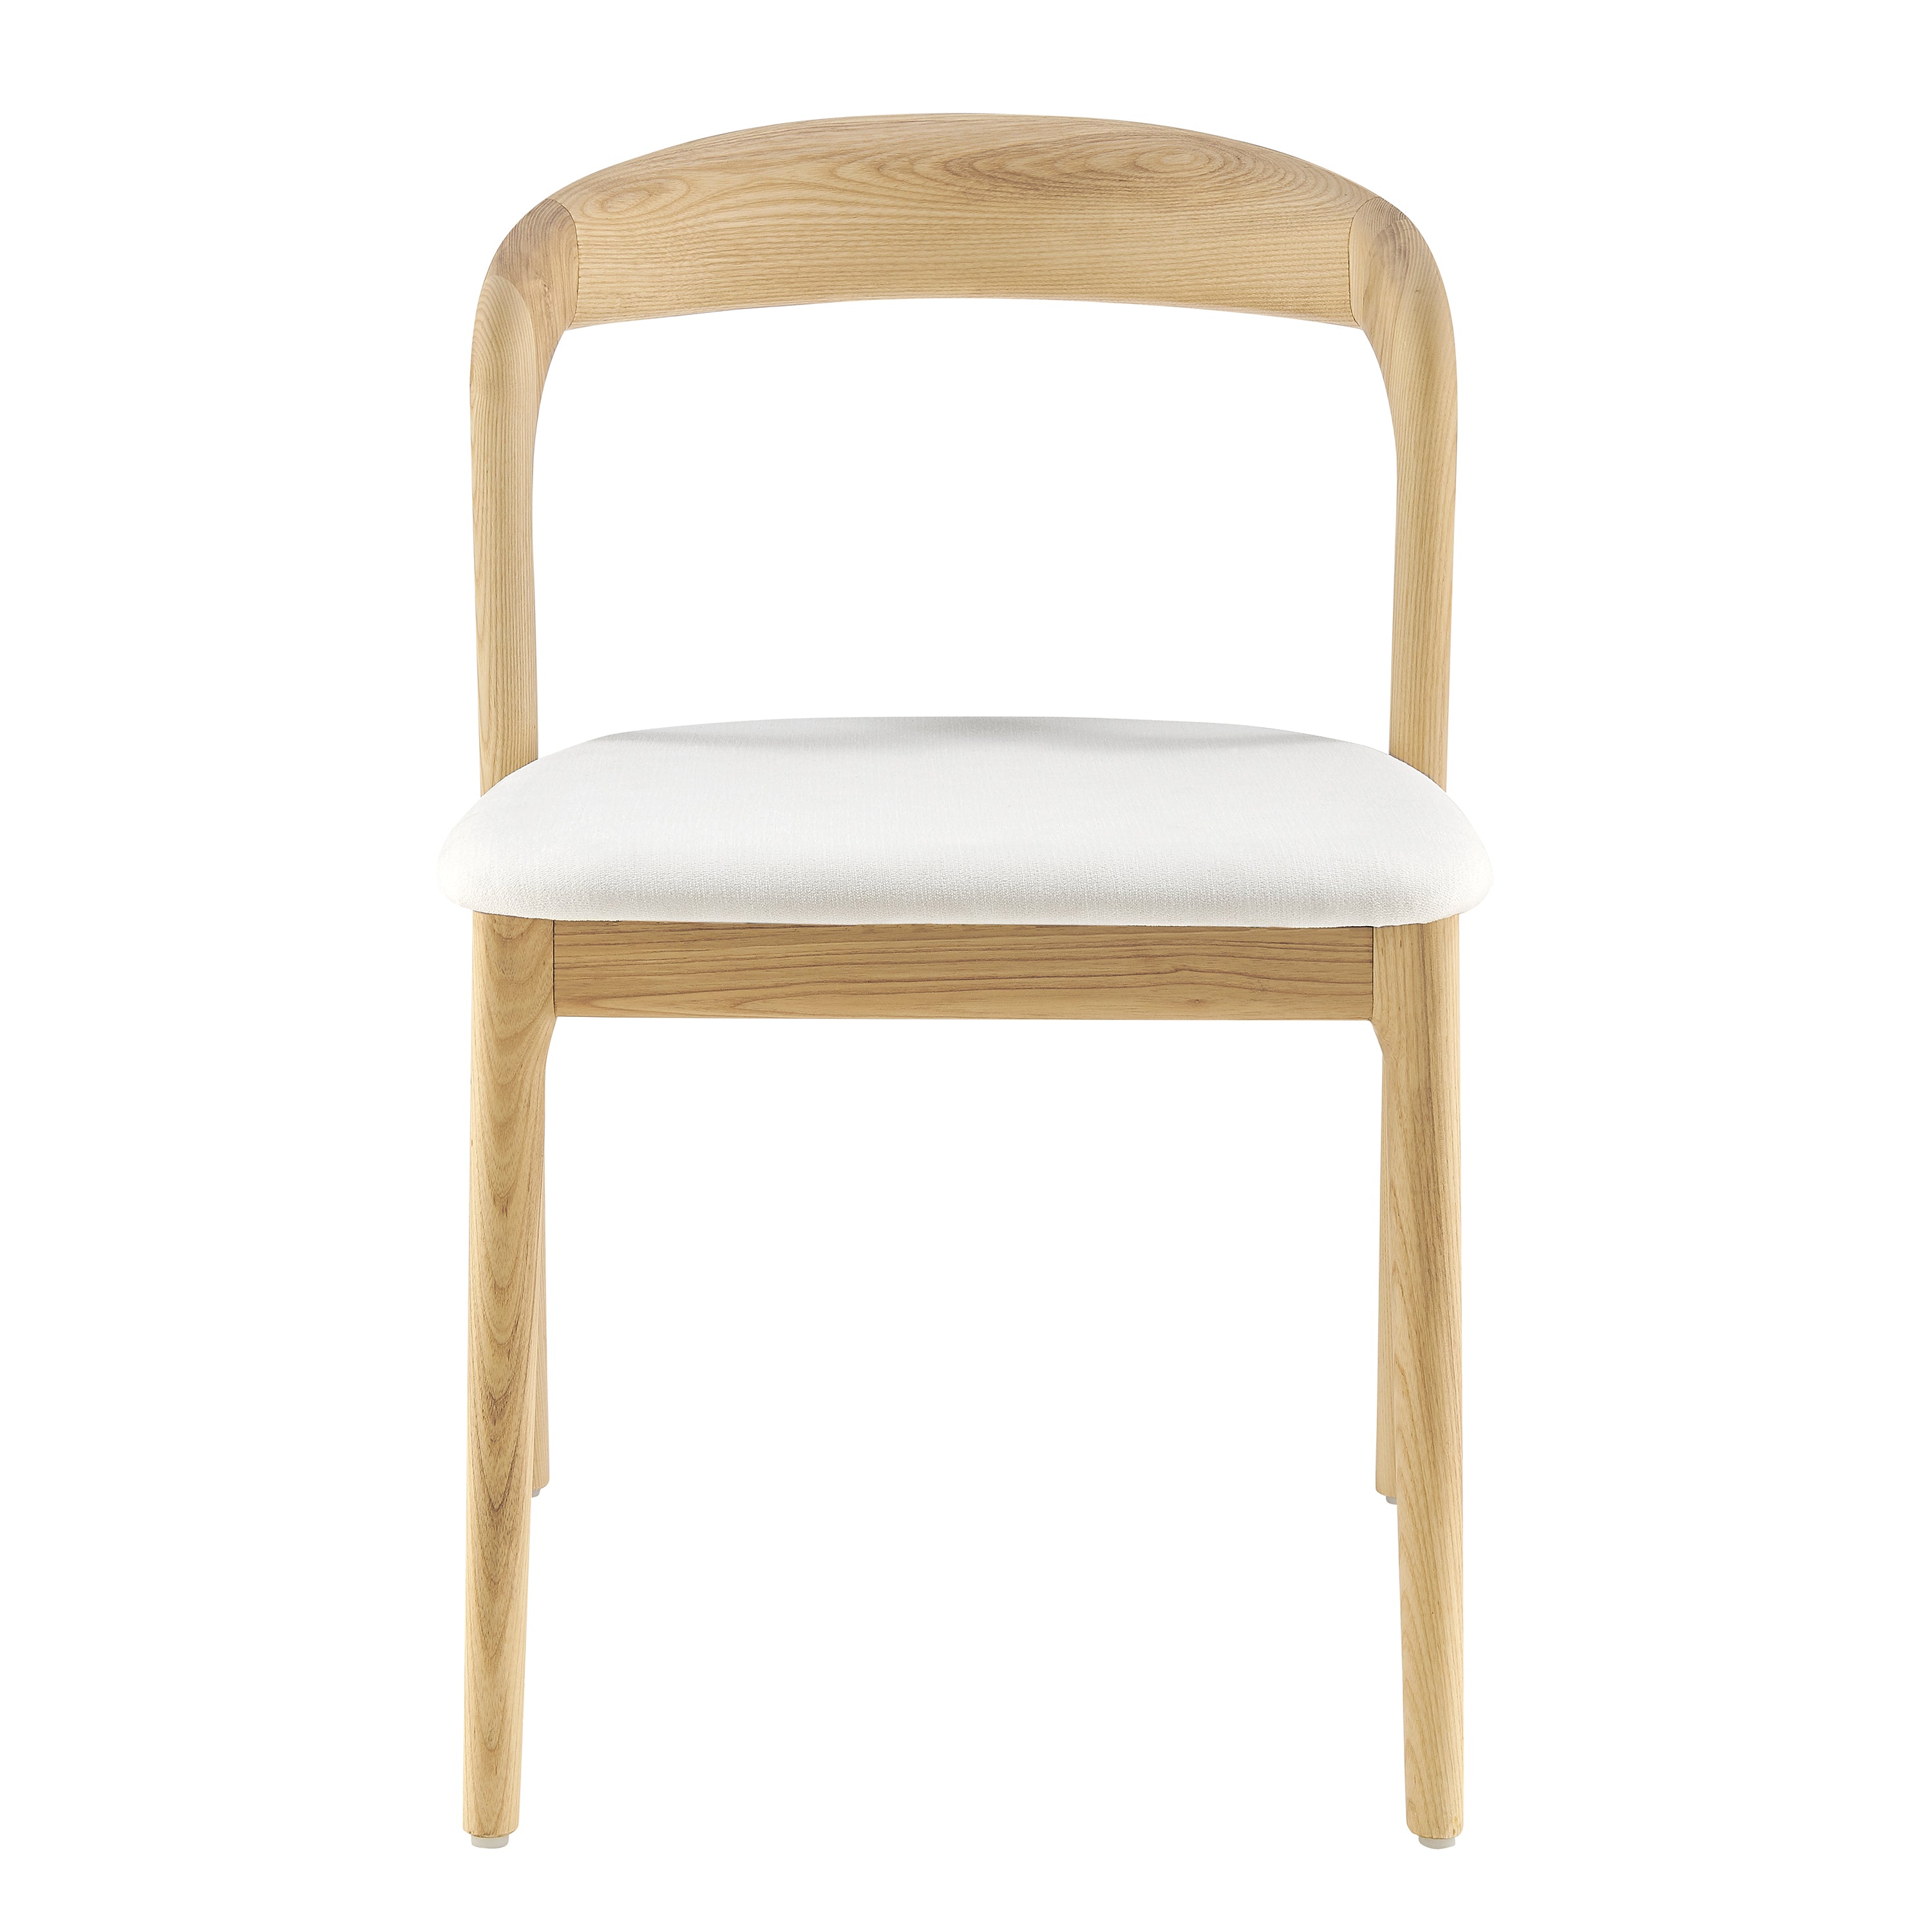 Euro Style Dining Chairs - Estelle Side Chair with White Fabric and Natural Ash Wood Frame - Set of 1